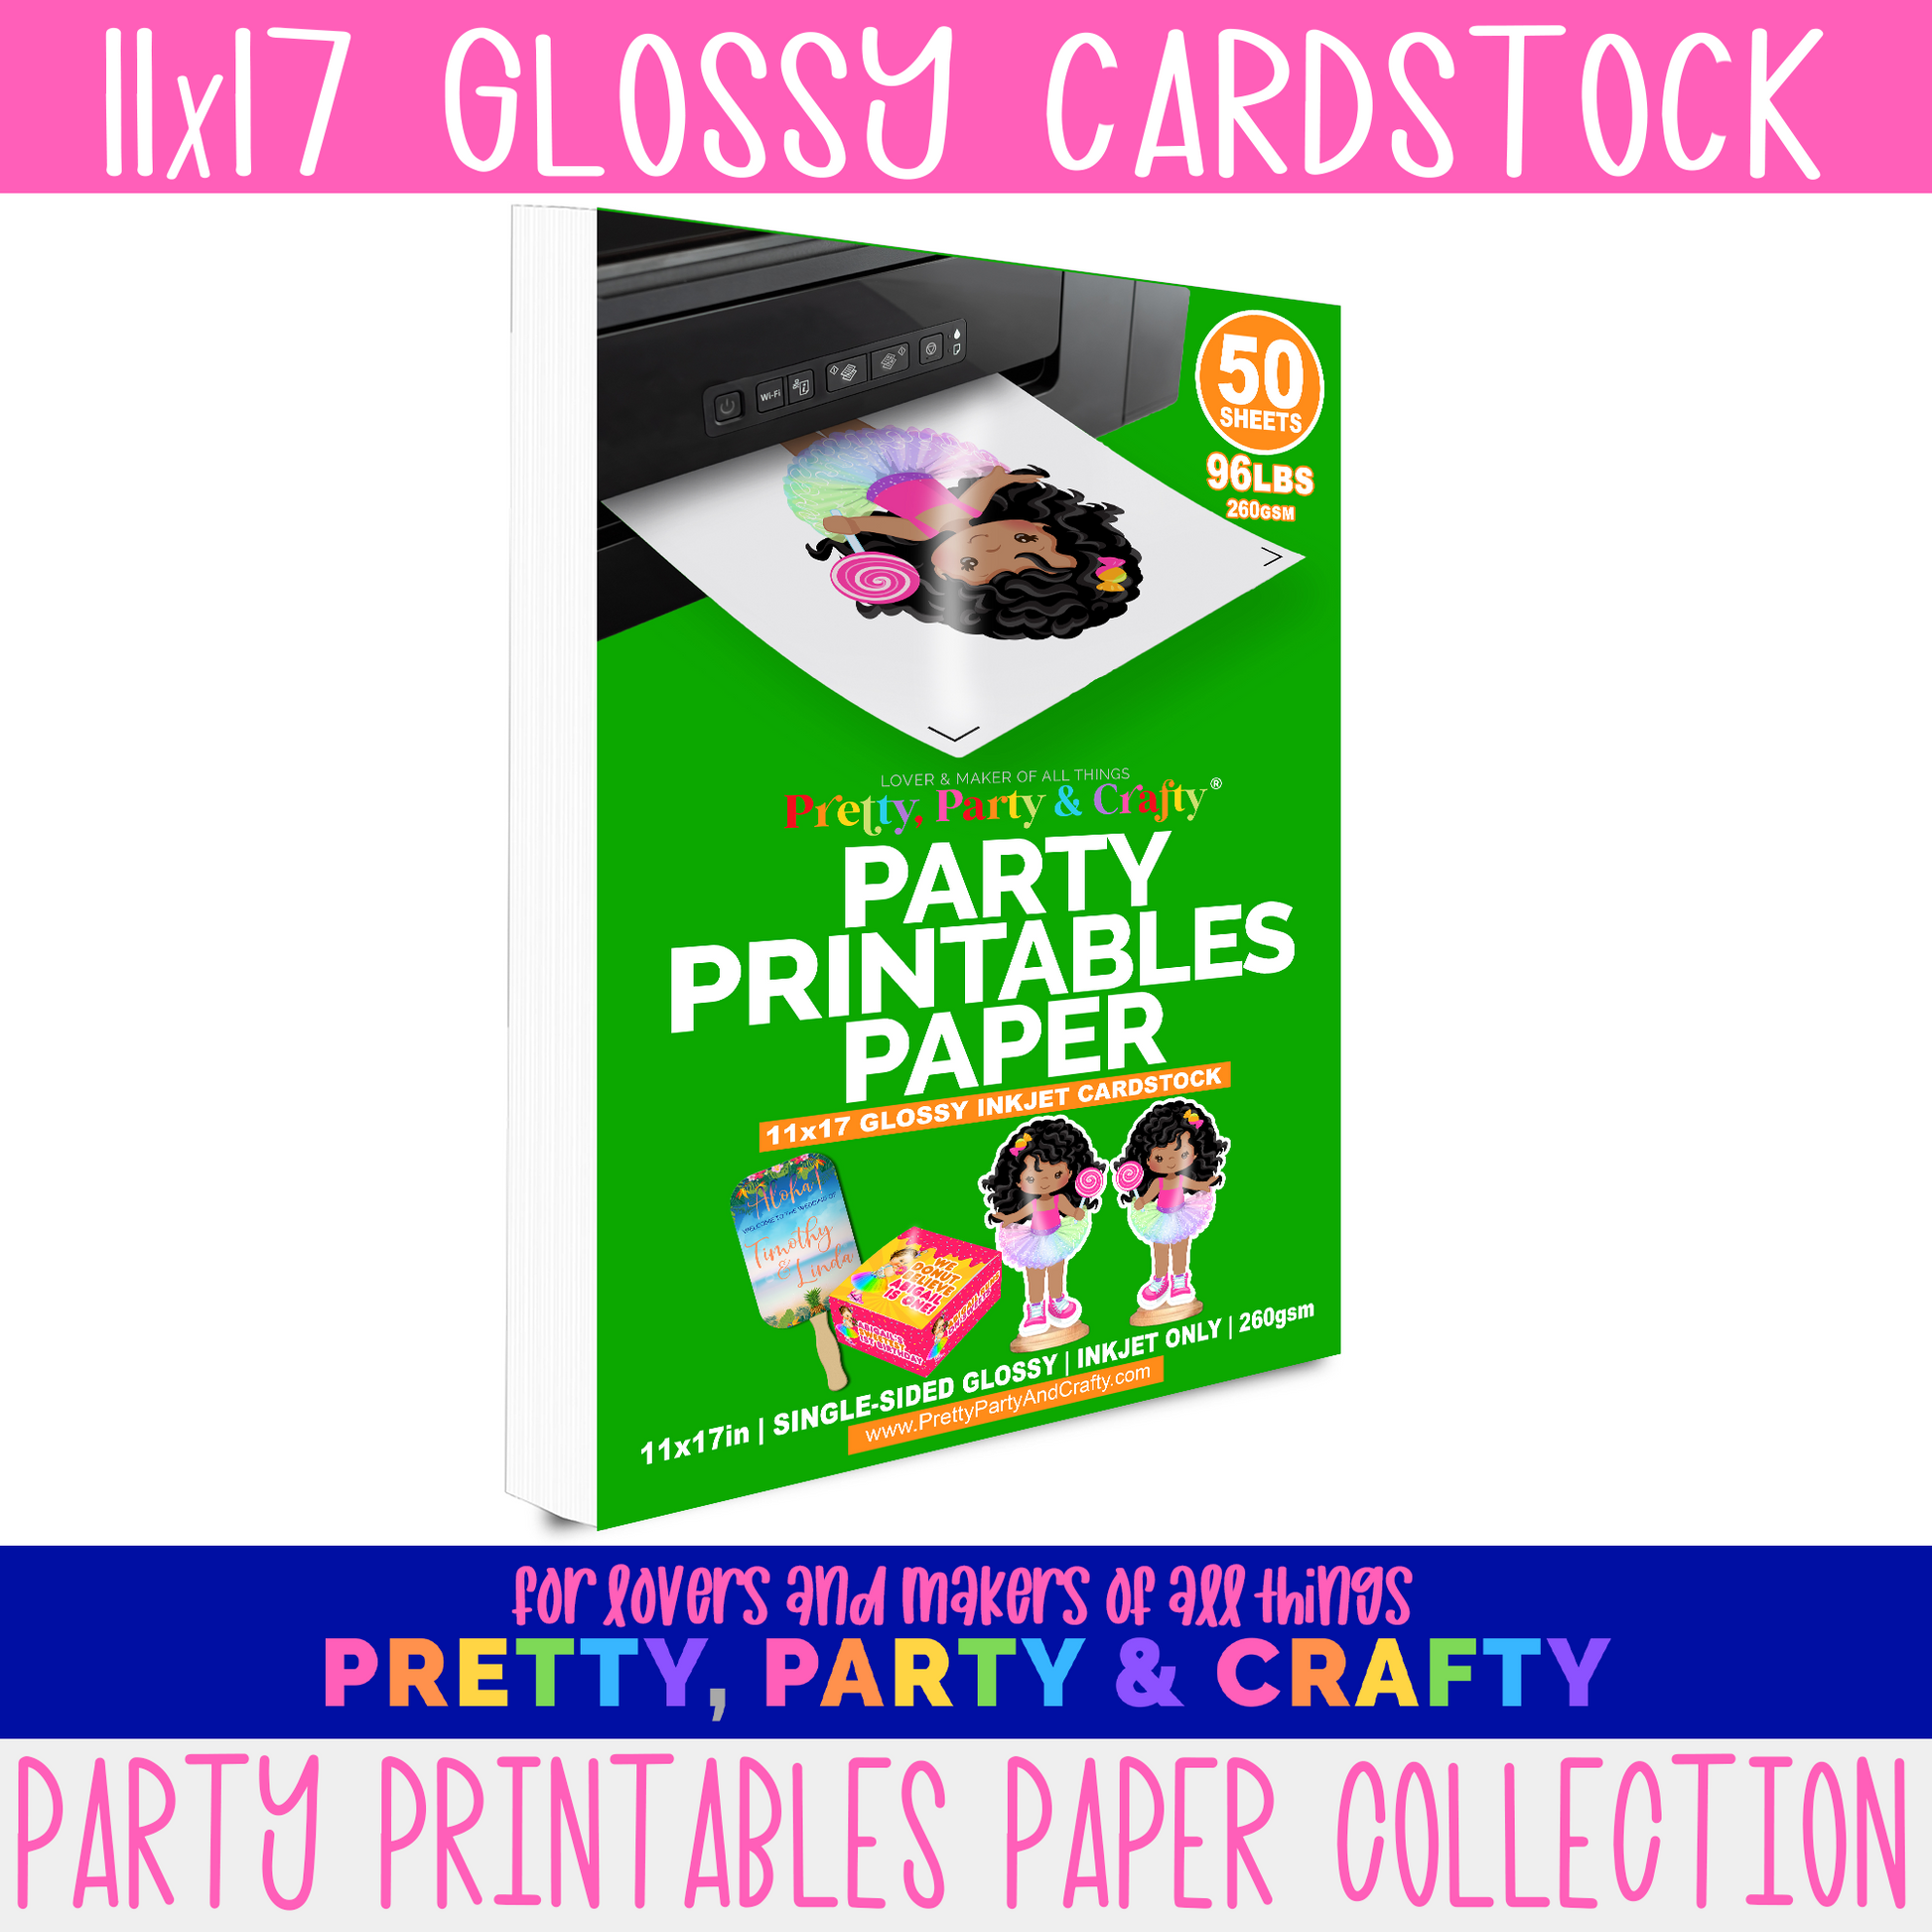 11x17 glossy cardstock  11x17 double sided glossy paper